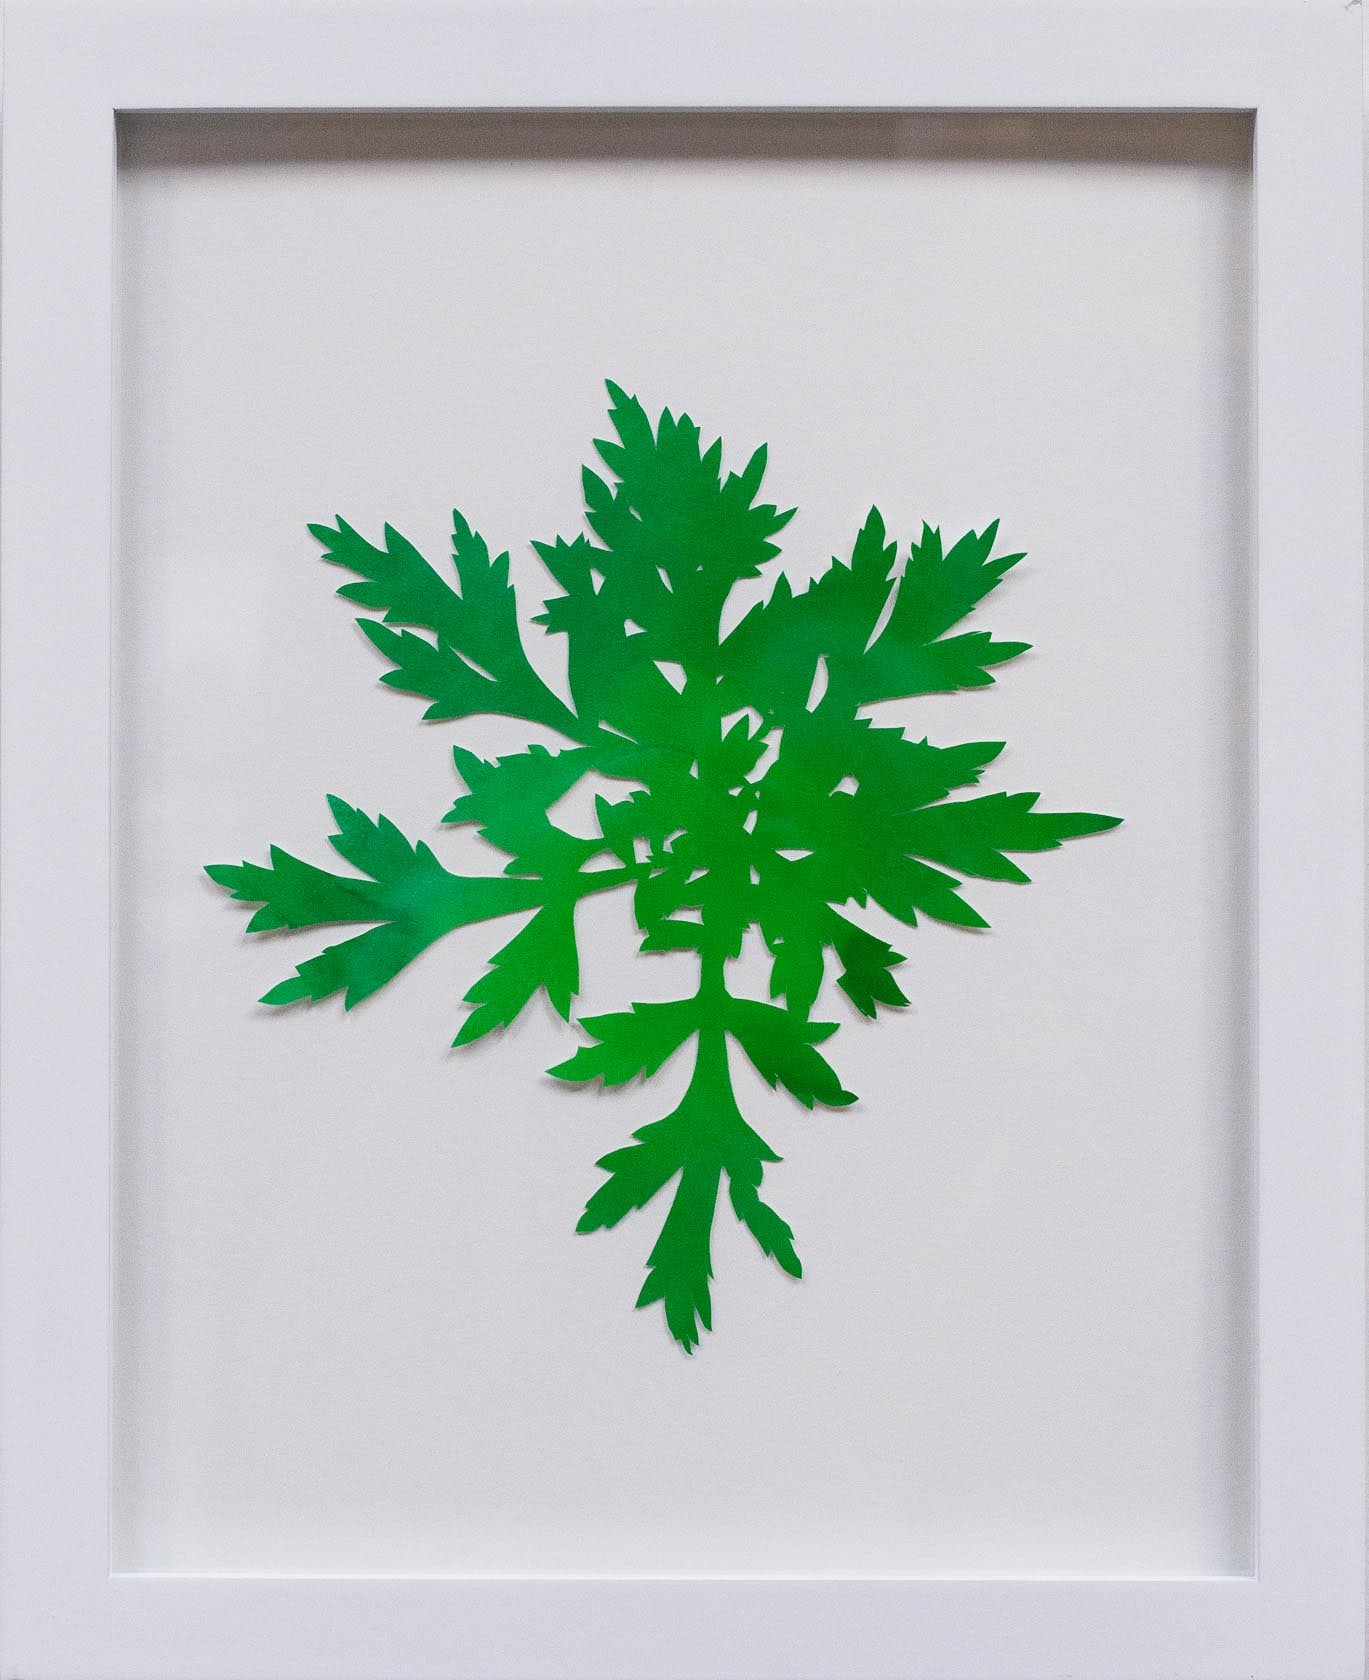 Hannah Cole  Carrot-Top Looking Weed, 2018  watercolor on cut paper  Framed: 14h x 11w in 35.56h x 27.94w cm  HC_060